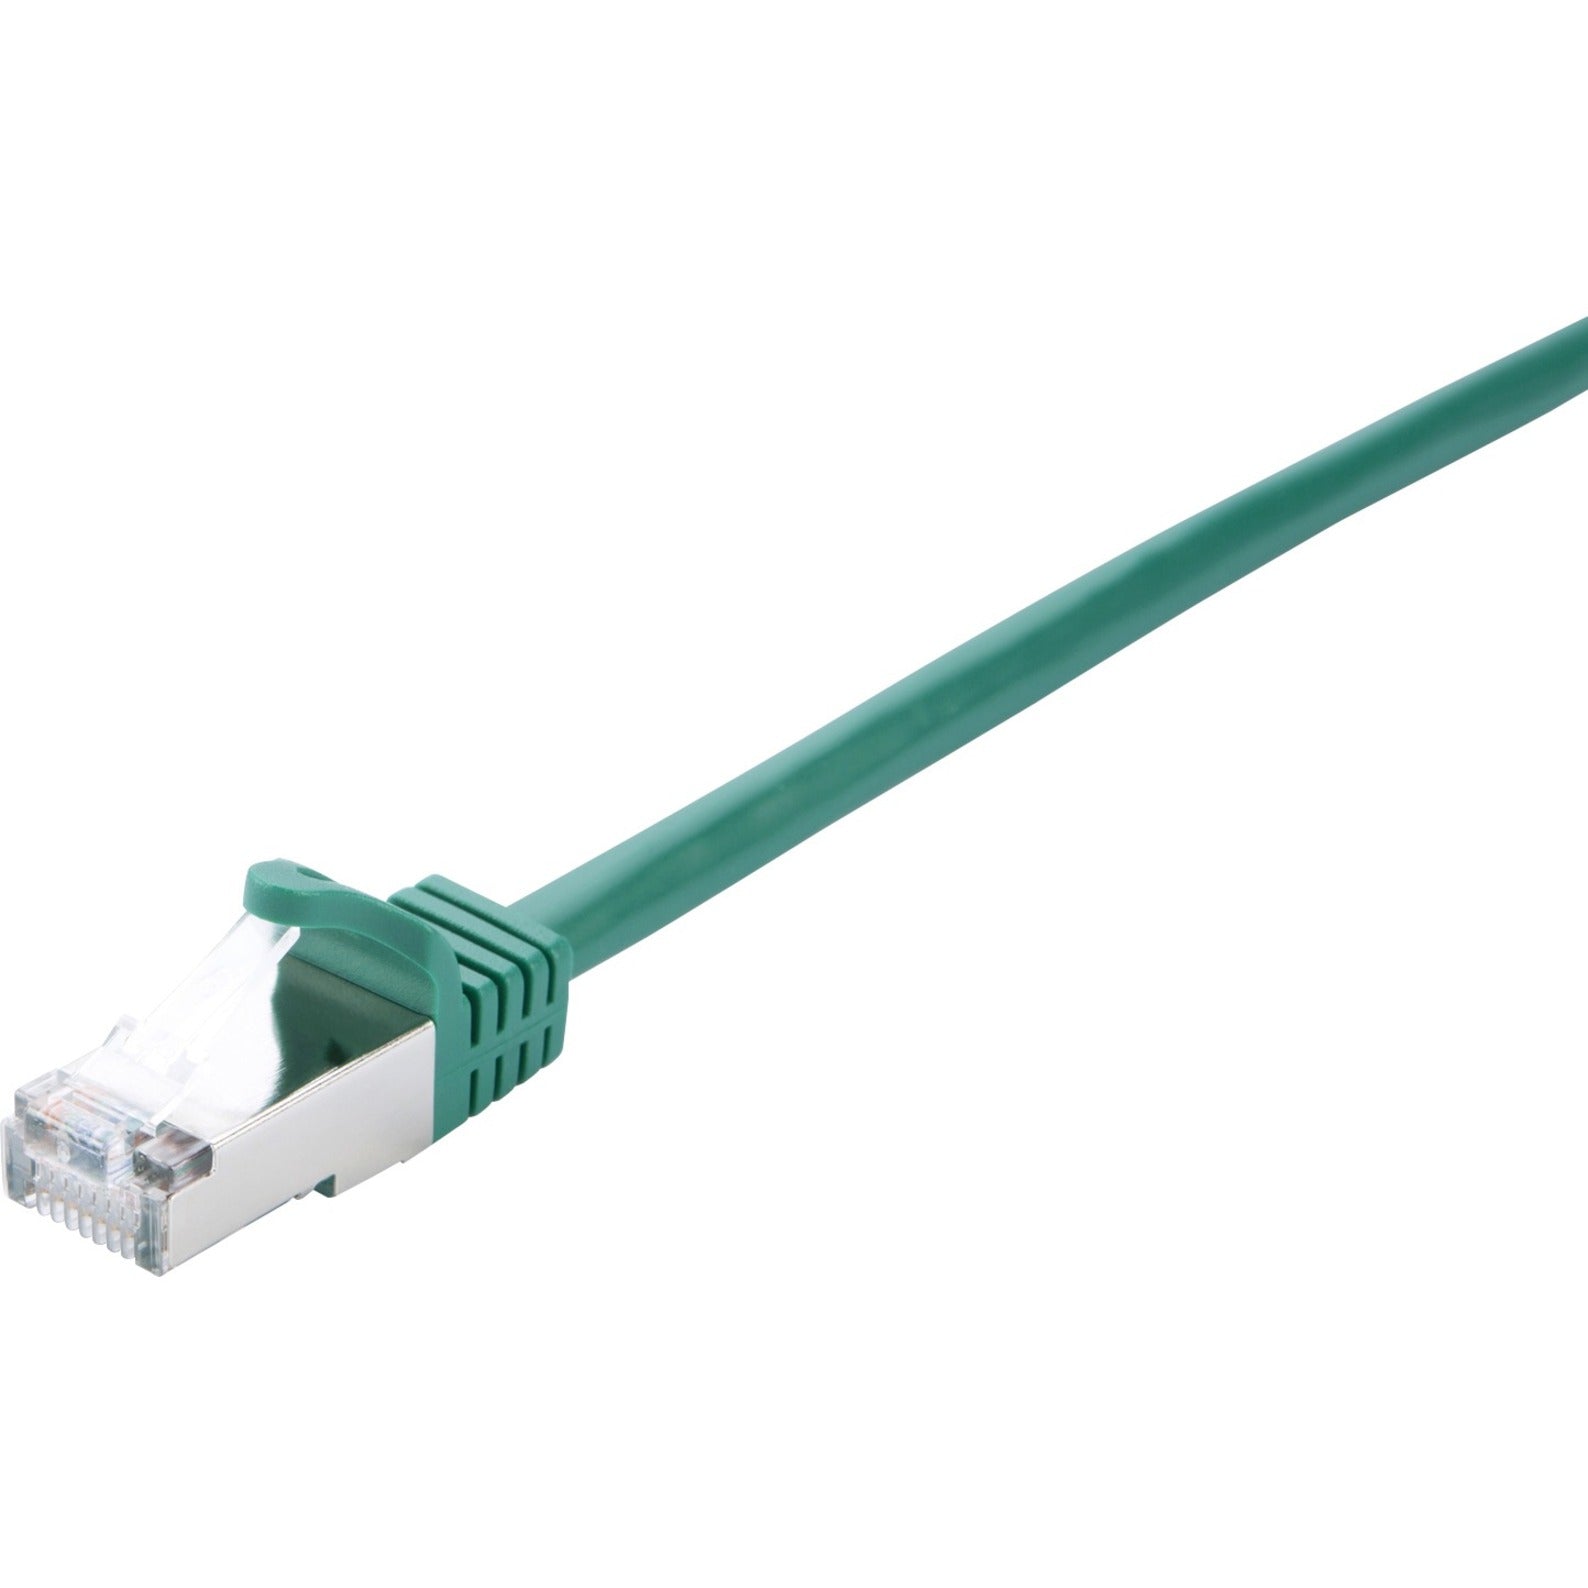 V7 V7CAT5STP-02M-GRN-1N Green Cat5e Shielded (STP) Cable RJ45 Male to RJ45 Male 2m 6.6ft, Molded, Booted, Locking Latch, Strain Relief, Noise Reducing